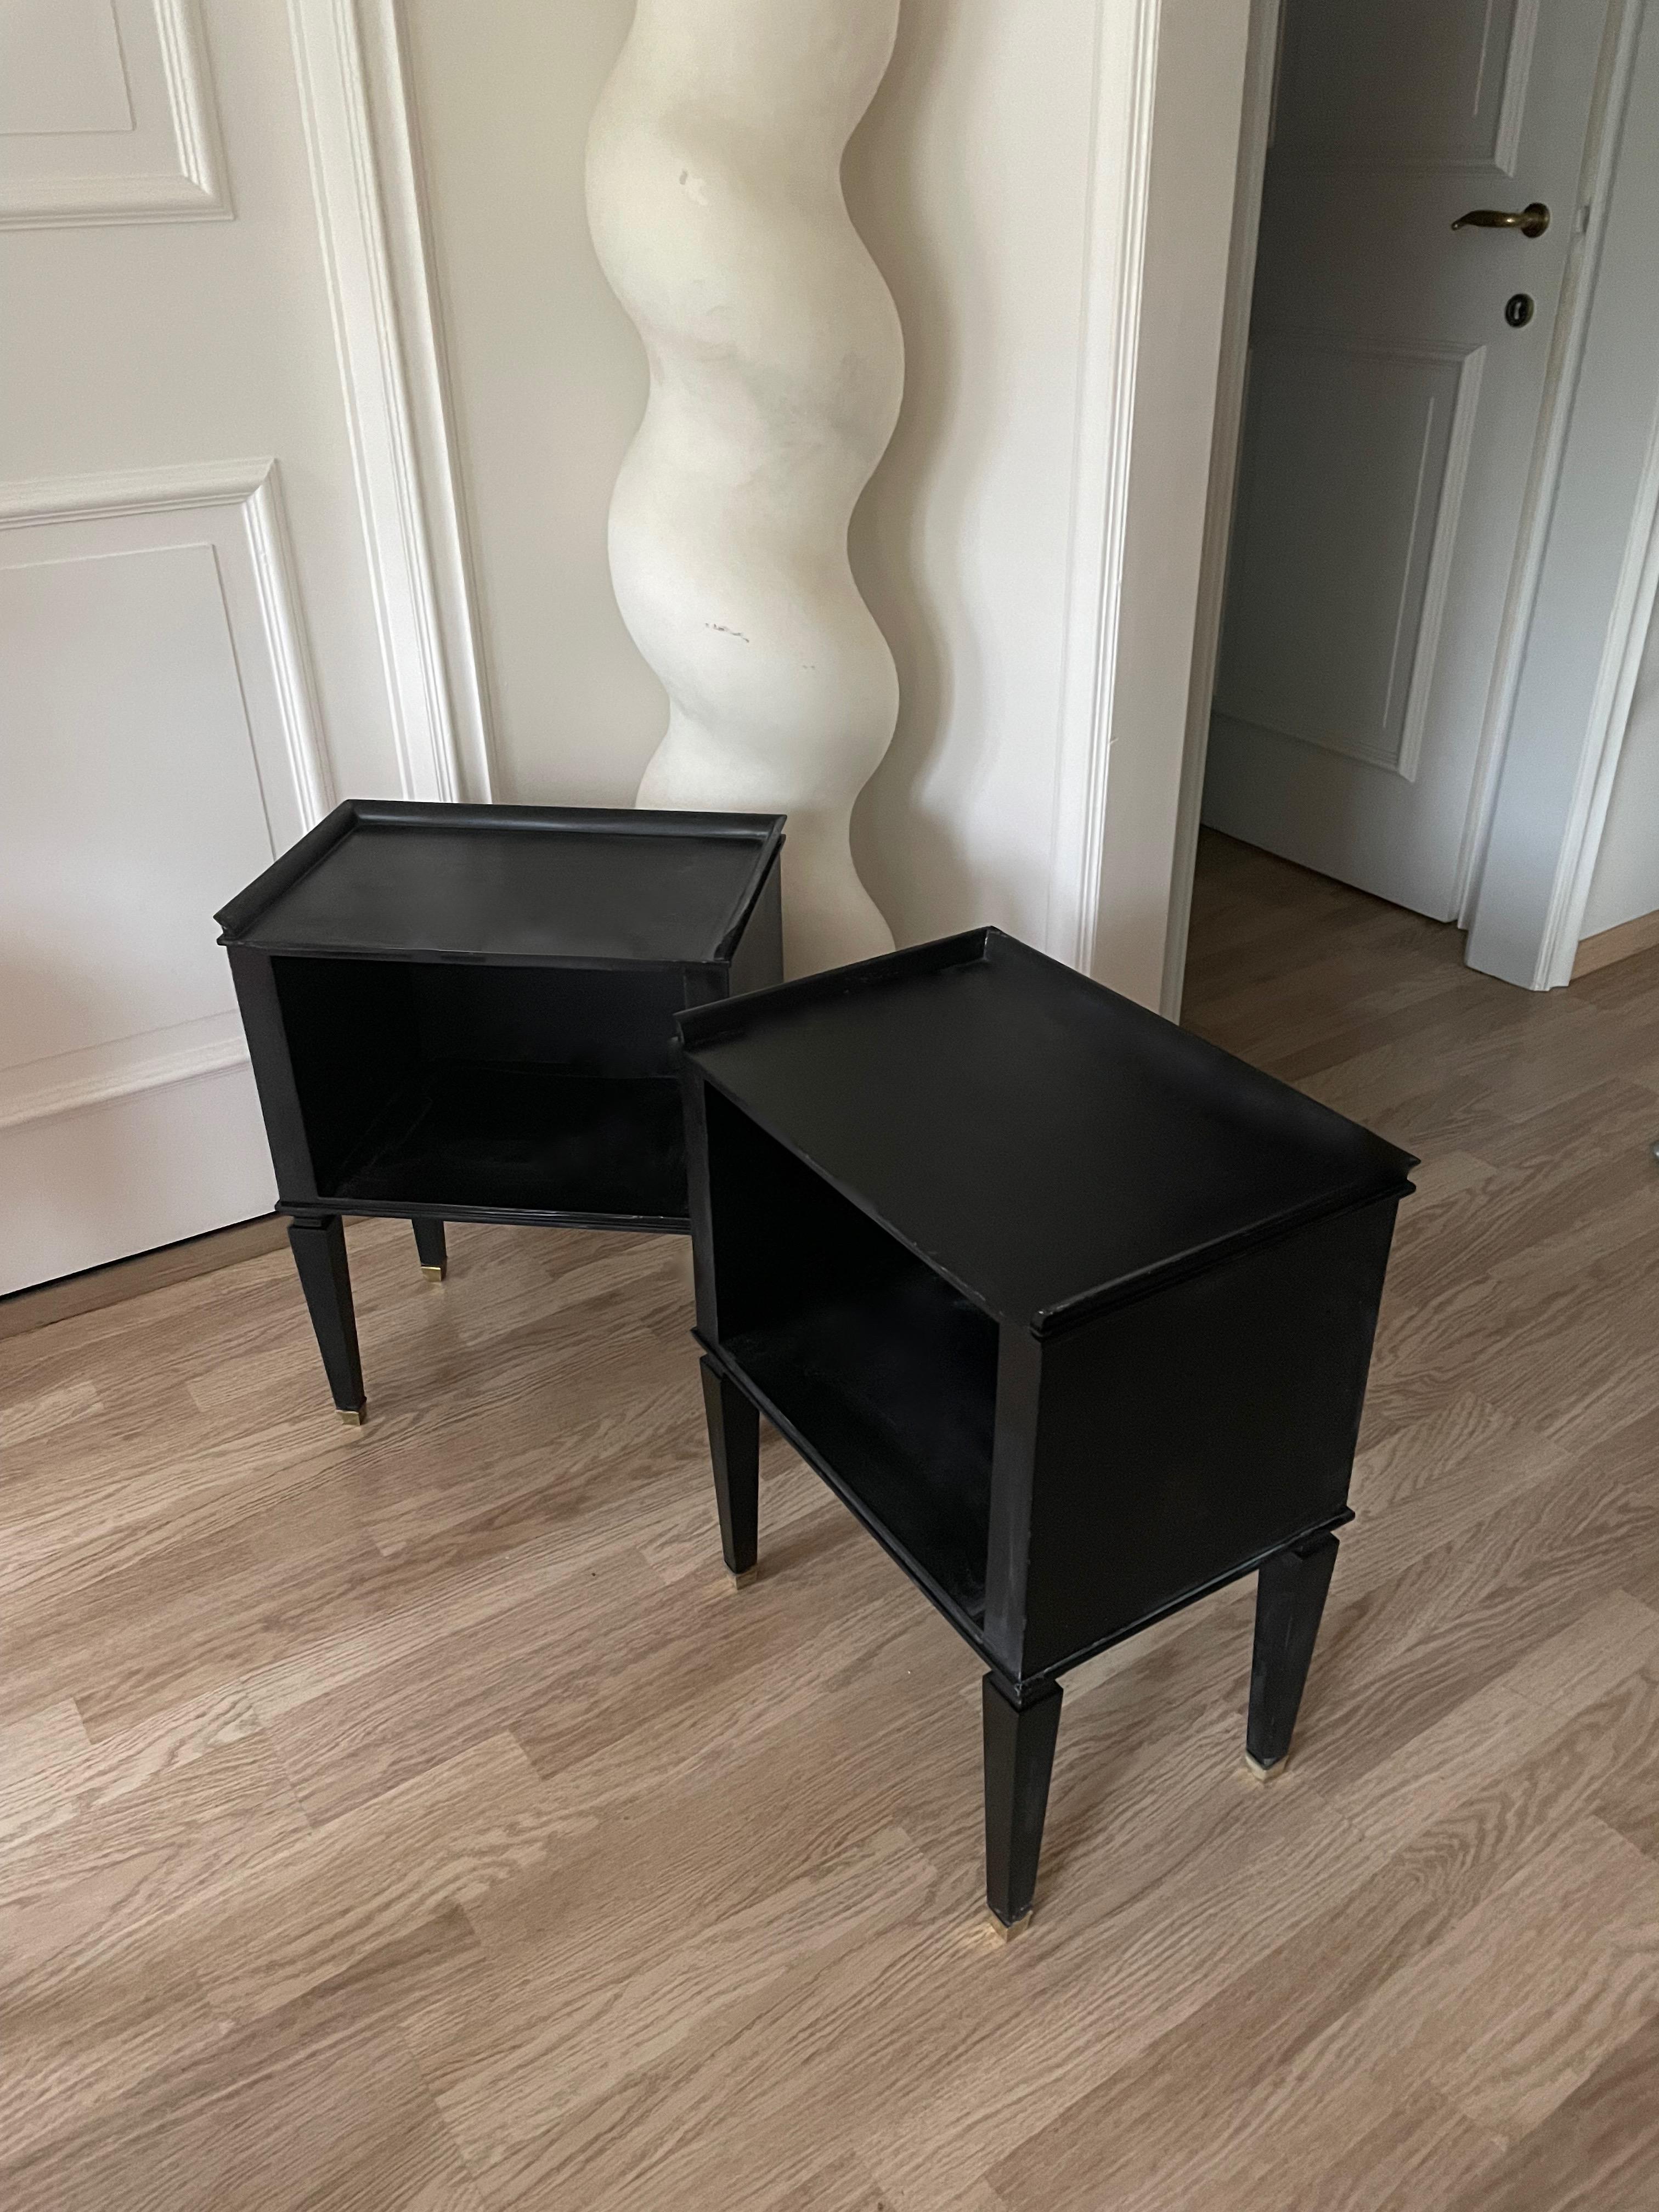 Mid-20th Century Pair of Ebonized Neoclassical Side Tables, France 1950.